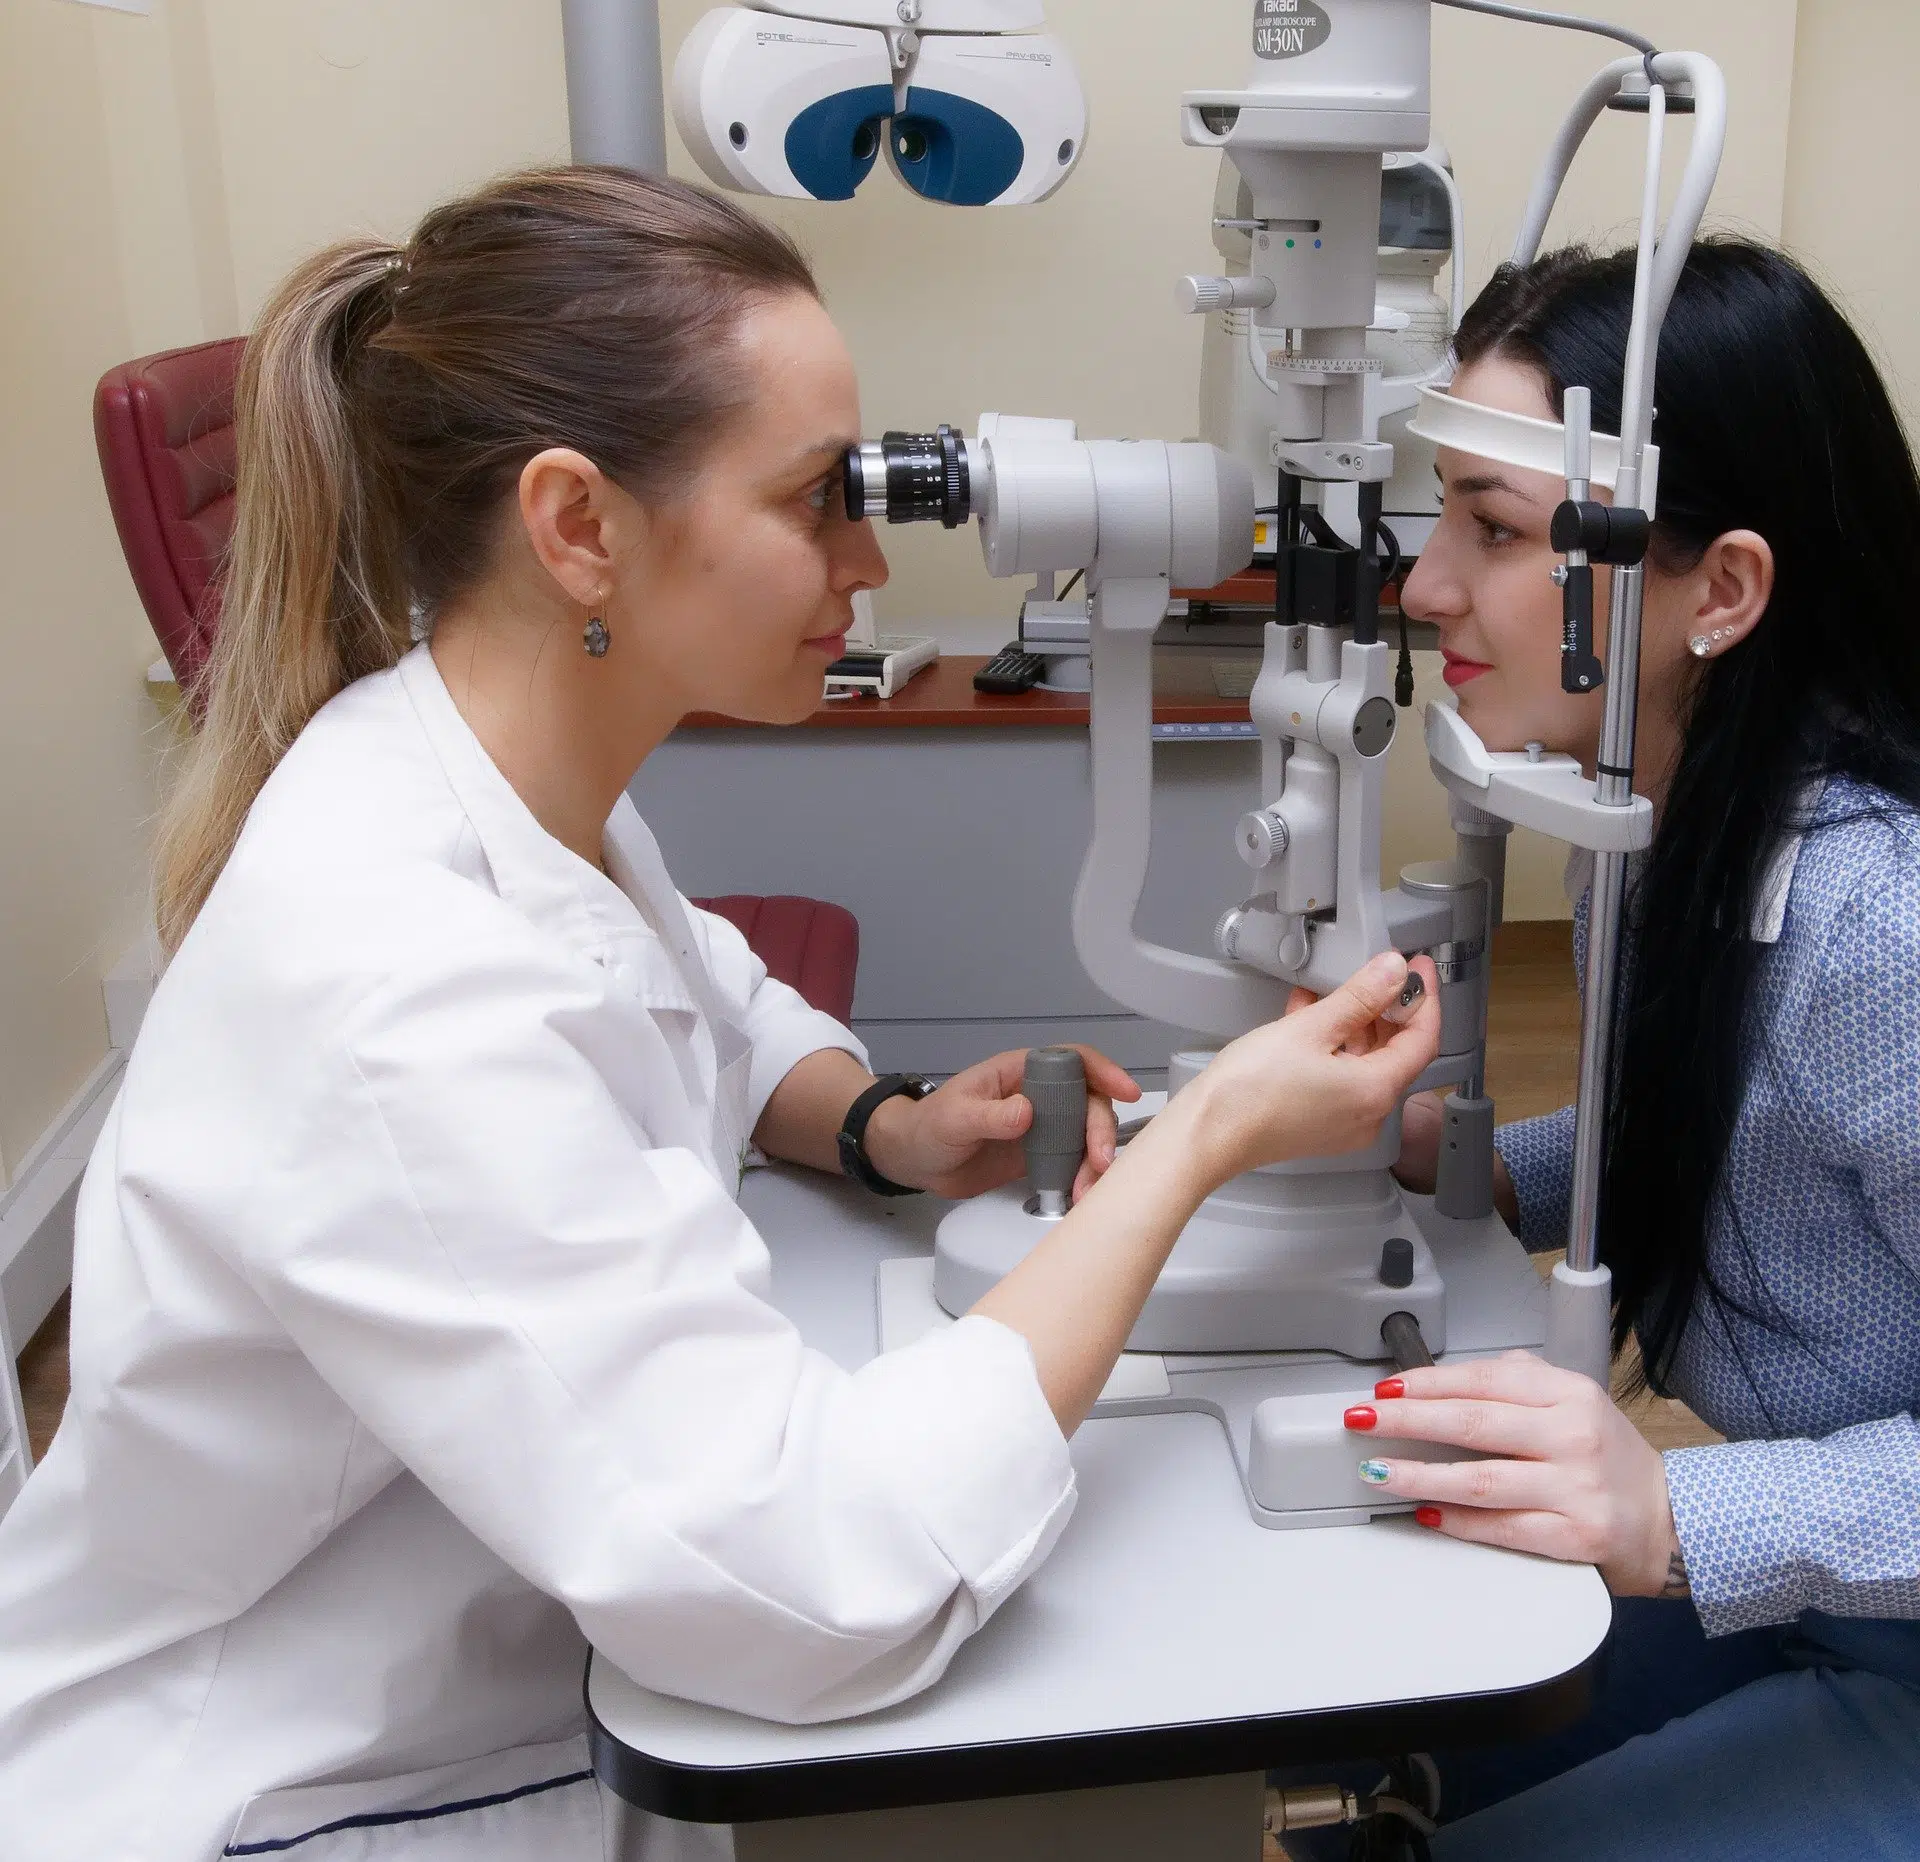 The next time you see an eye doctor, you can be referred to a hospital, here's why